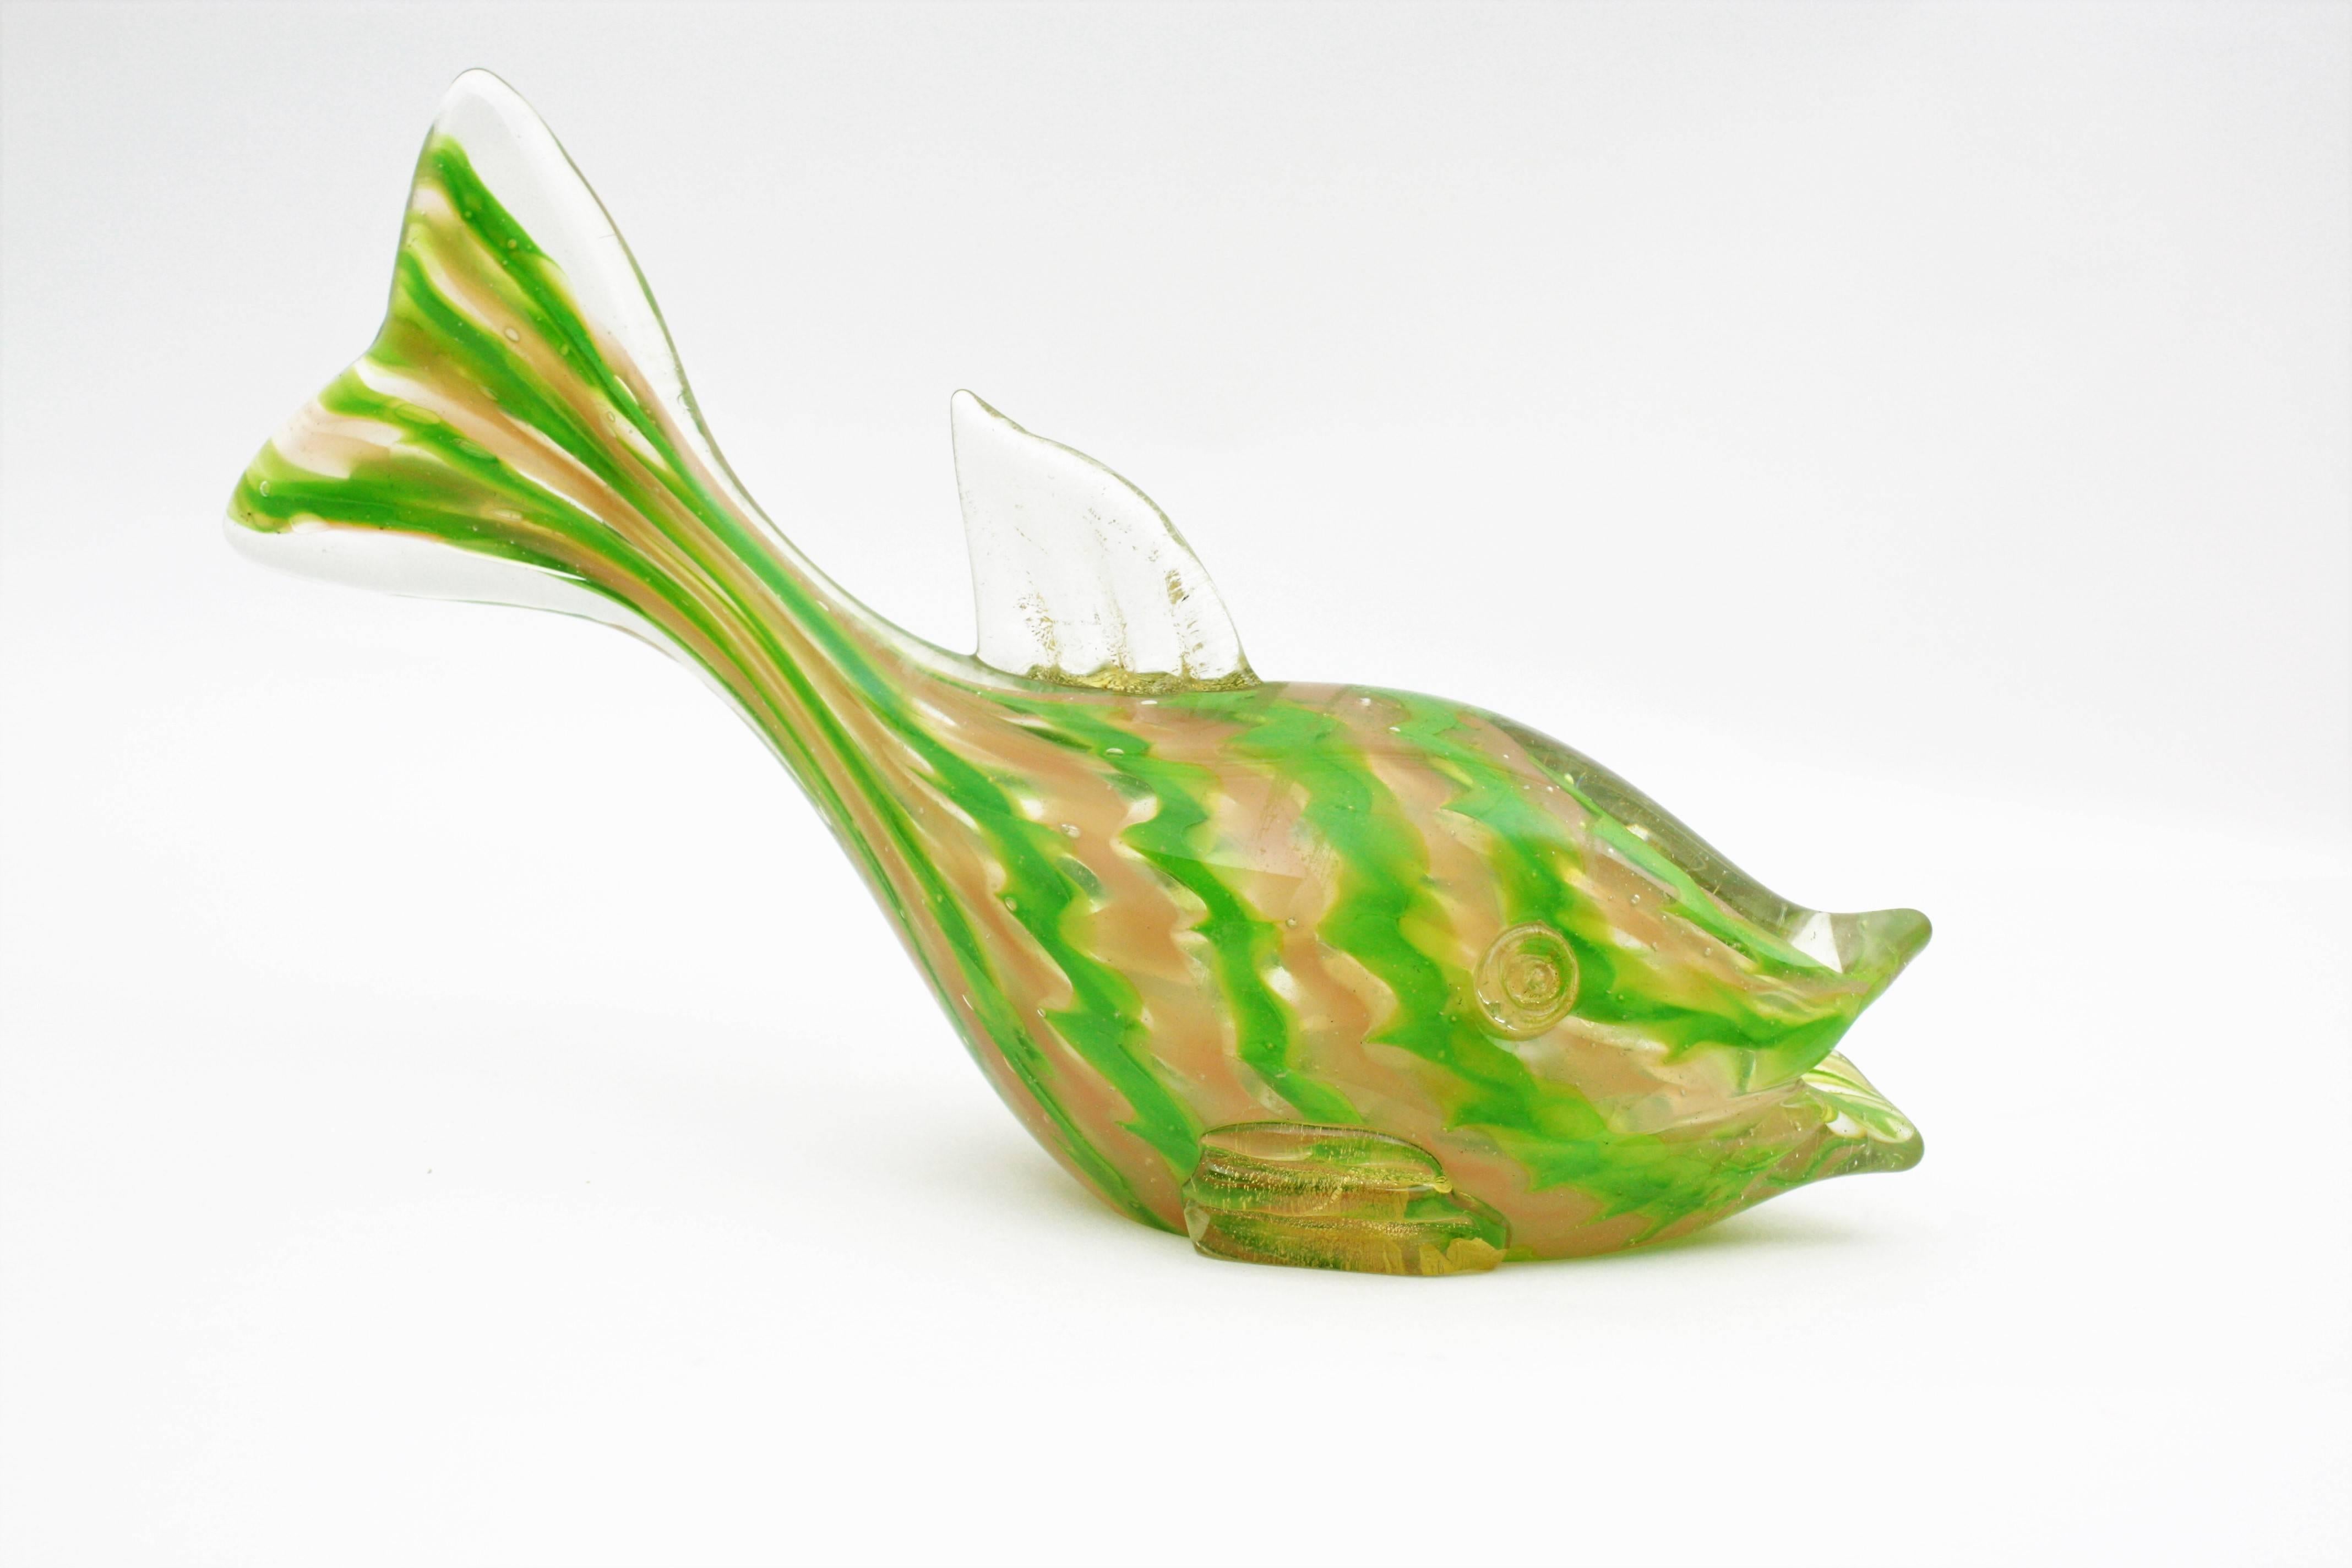 Gold Flecks Acid Green & Cream Ribbons Murano Art Glass Fish Figure, Italy 1940s
A lovely Murano glass fish sculpture with colorful ribbons in acid green and cream color cased into clear glass and gold dust accents,
Measures: 28 cm W x 19,5 cm H x 9